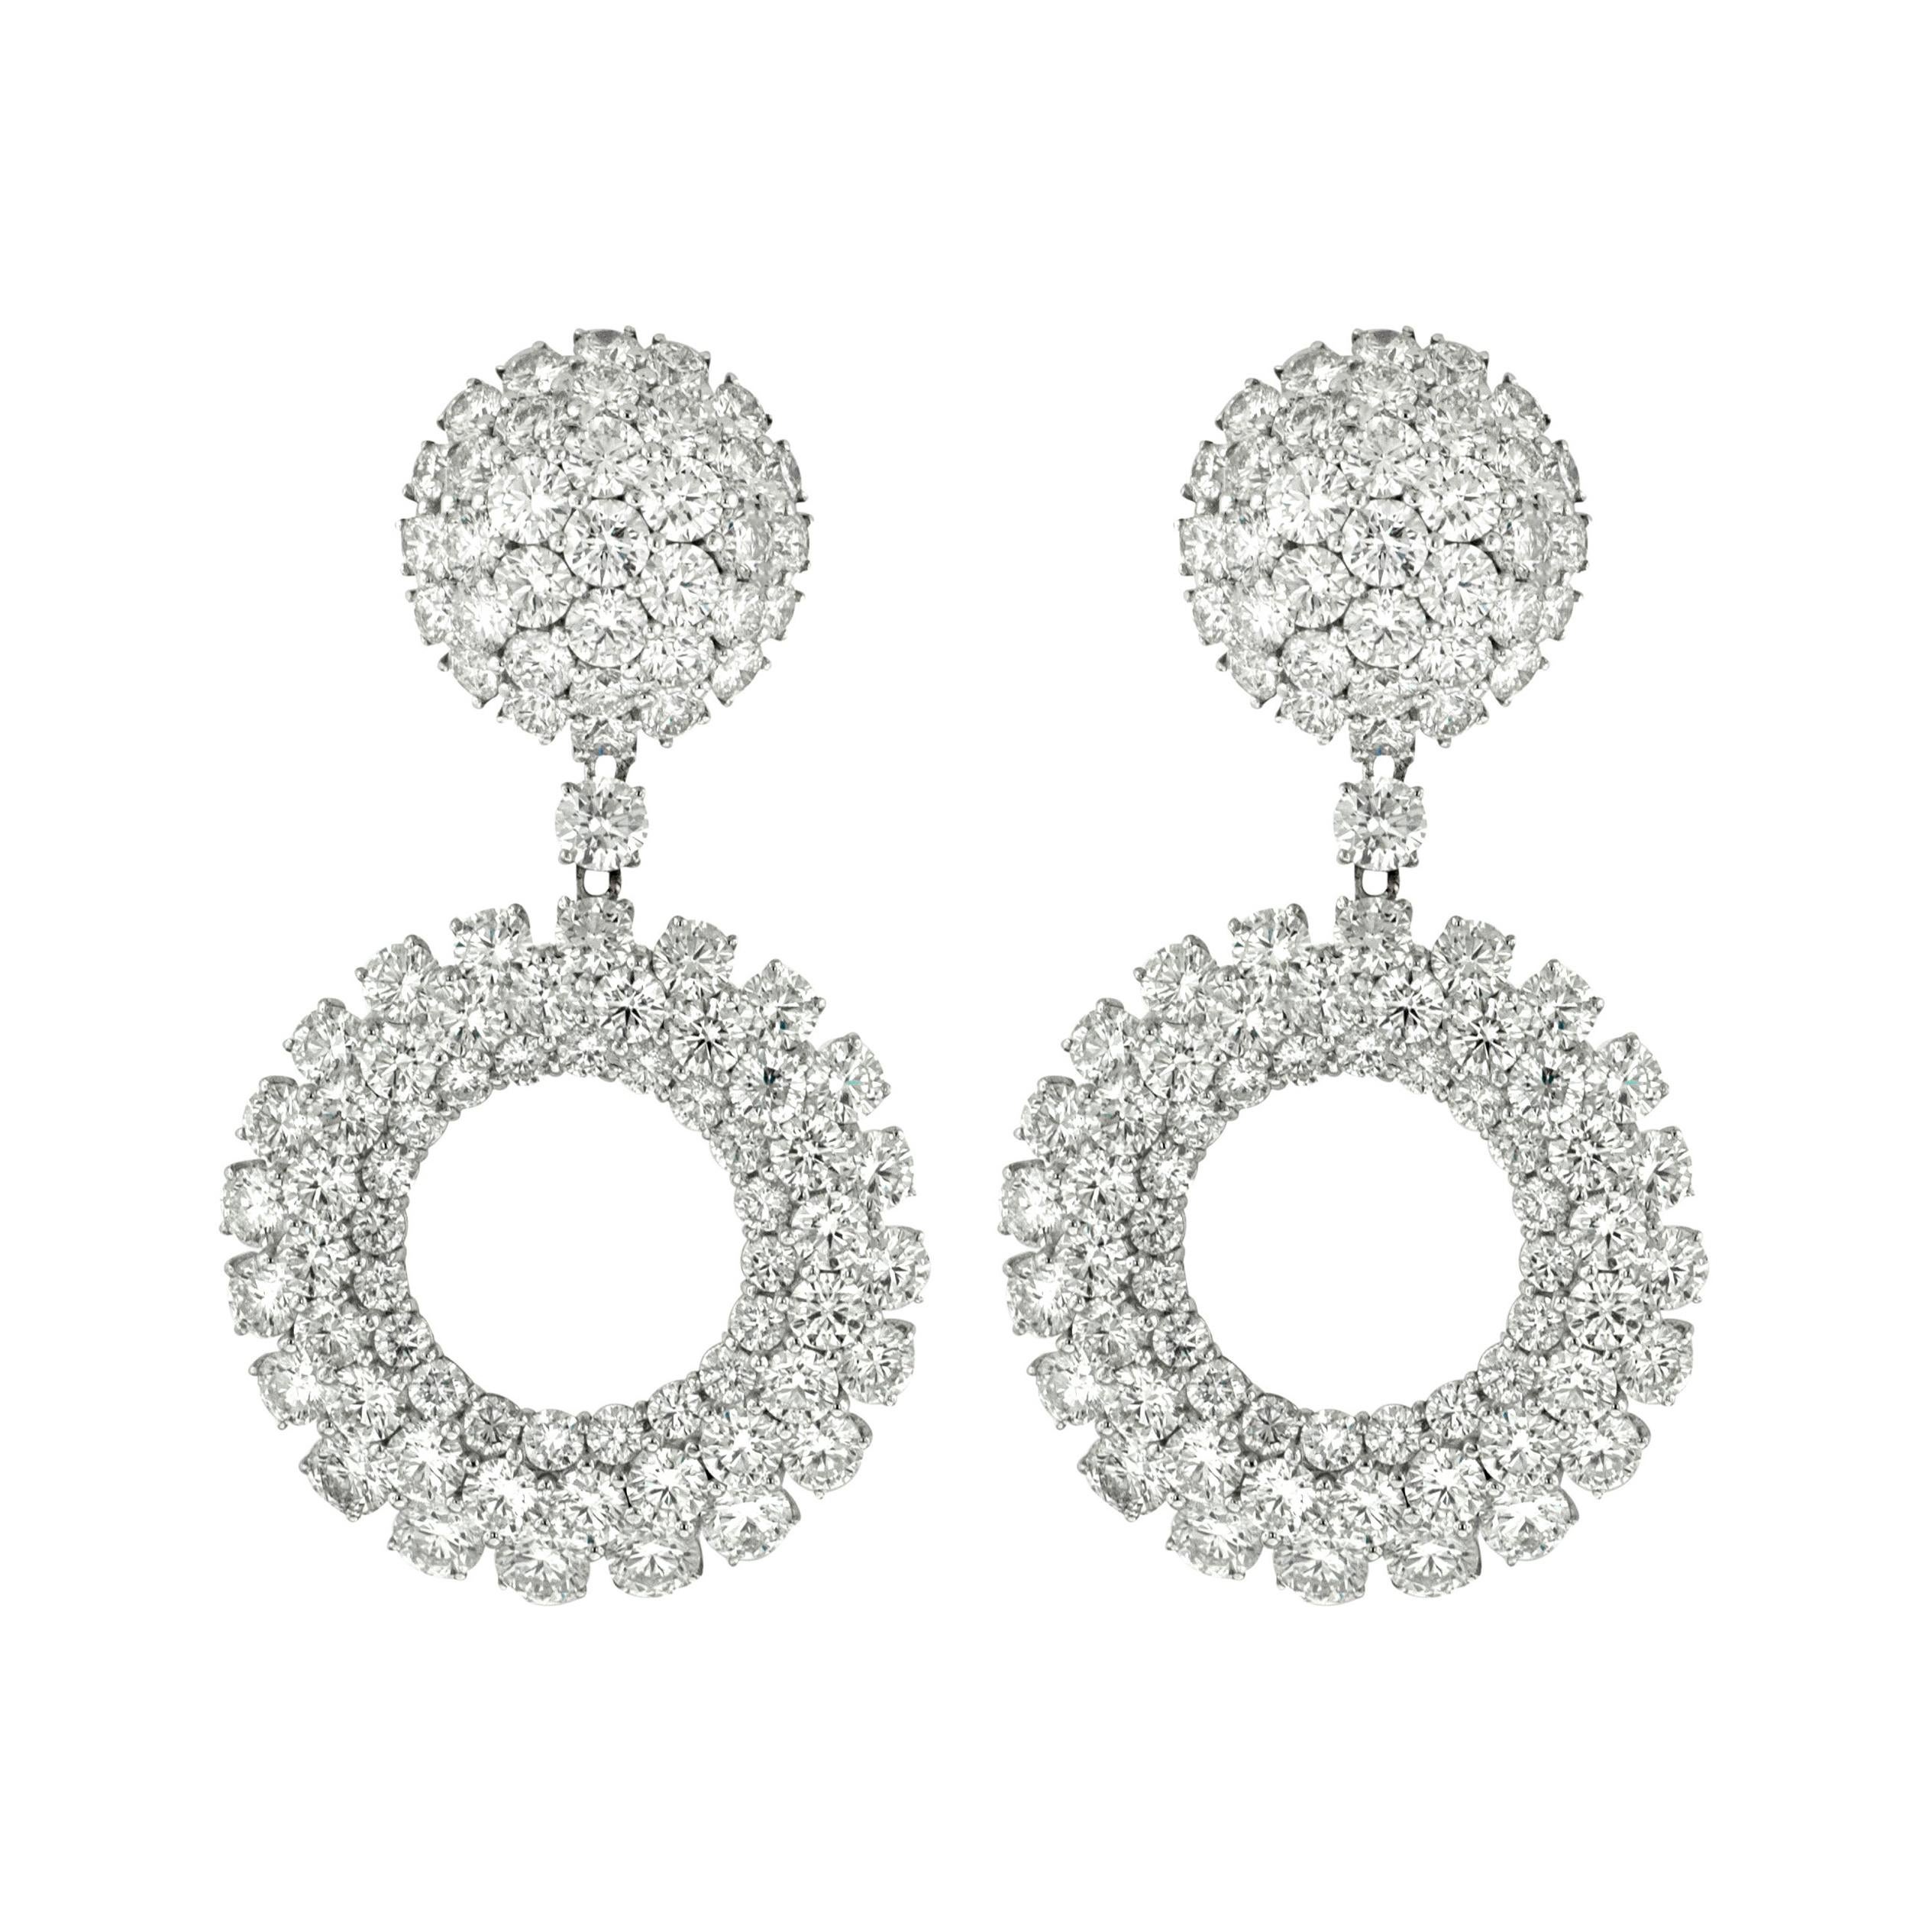 Circle Pave Fashion Diamond Earrings with Brilliant Cut Diamonds in White Gold